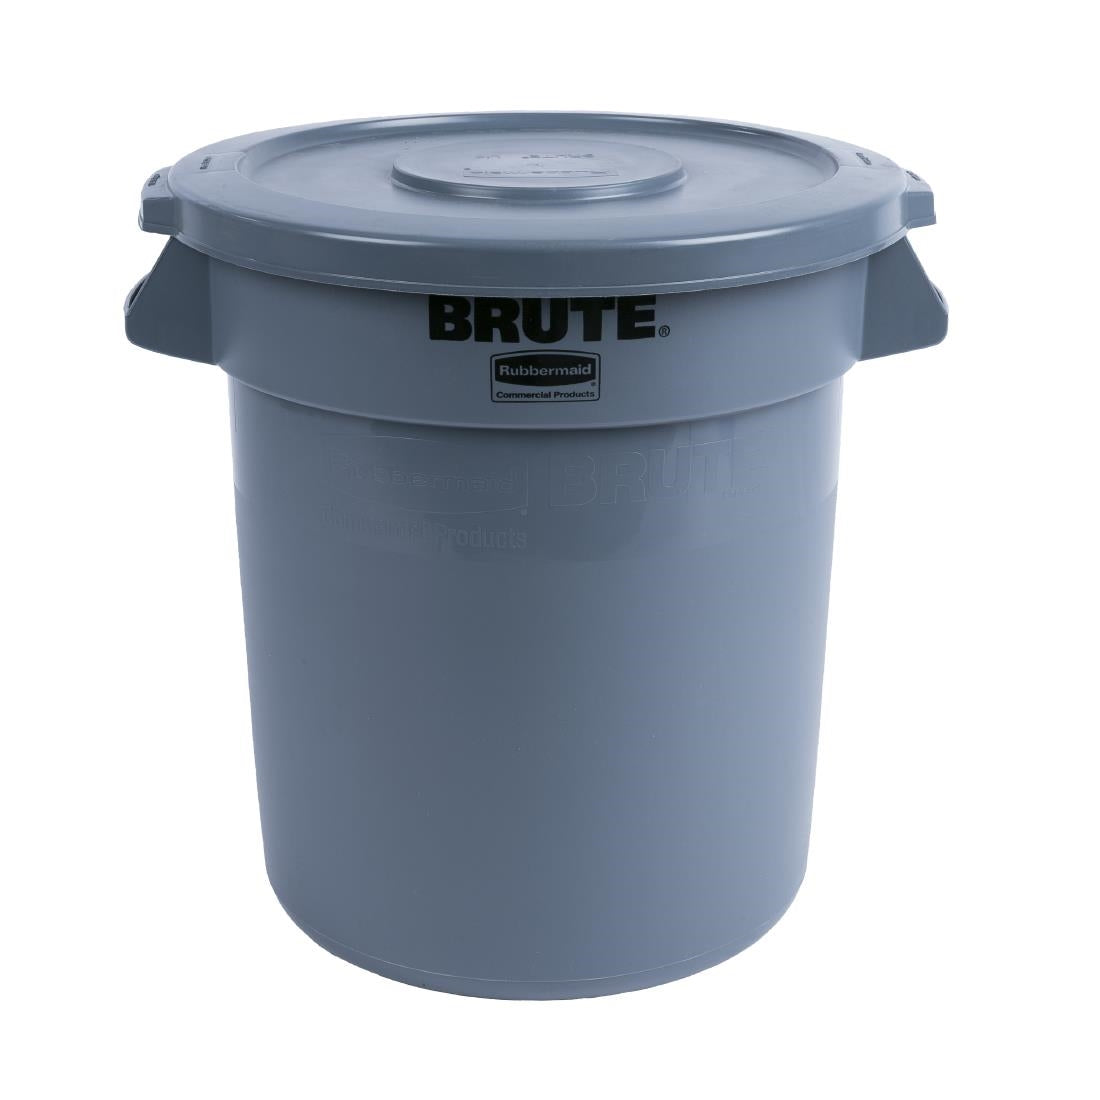 L639 Rubbermaid Brute Utility Container 37.9Ltr Grey JD Catering Equipment Solutions Ltd